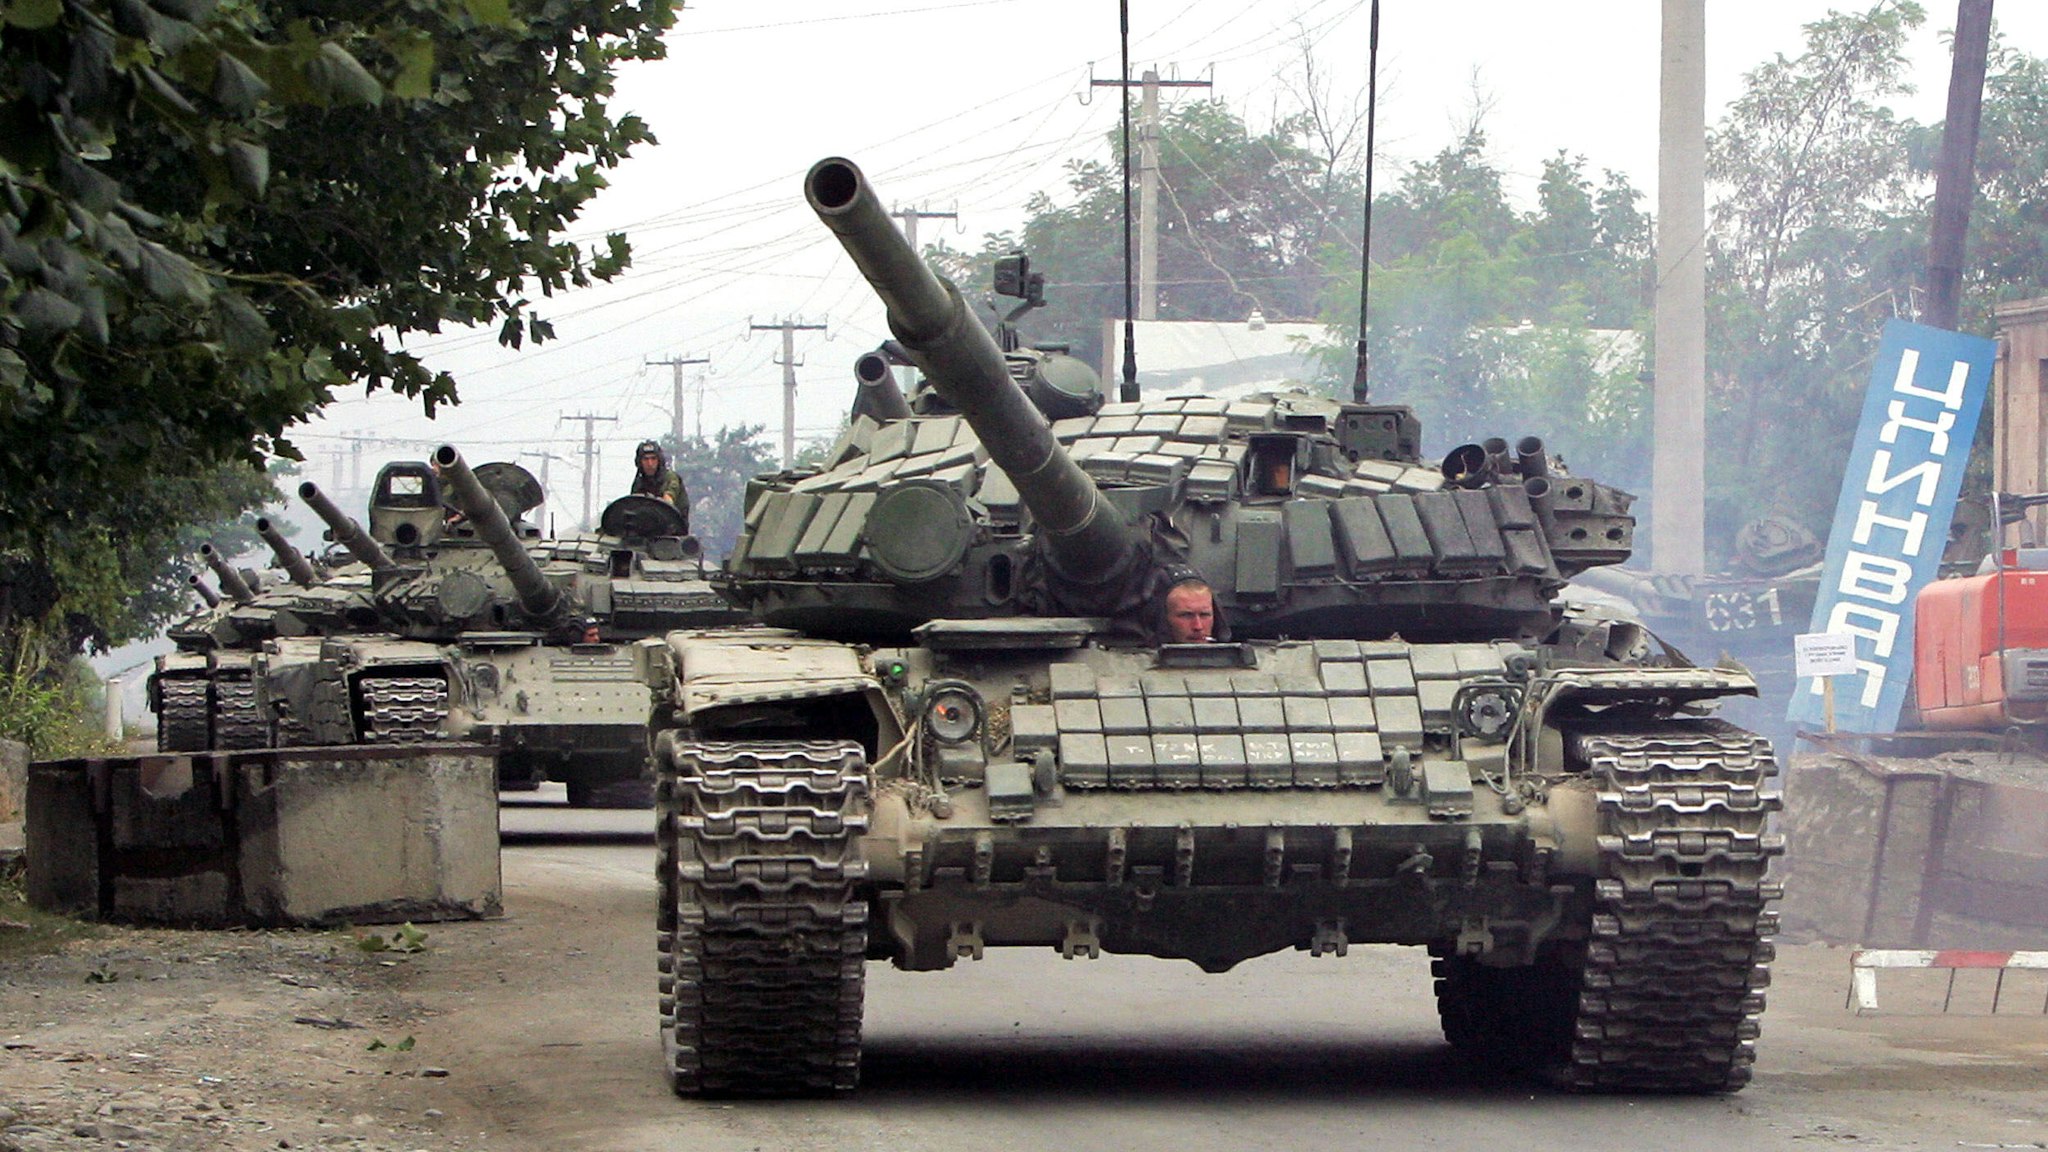 A column of Russian tanks leaves the South Ossetian capital Tskhinvali on August 21, 2008, to the border of Russian Federation. Russia's withdrawal of all its forces from Georgia will be completed on August 22, Defence Minister Anatoly Serdyukov announced on August 21, quoted by the Interfax news agency.